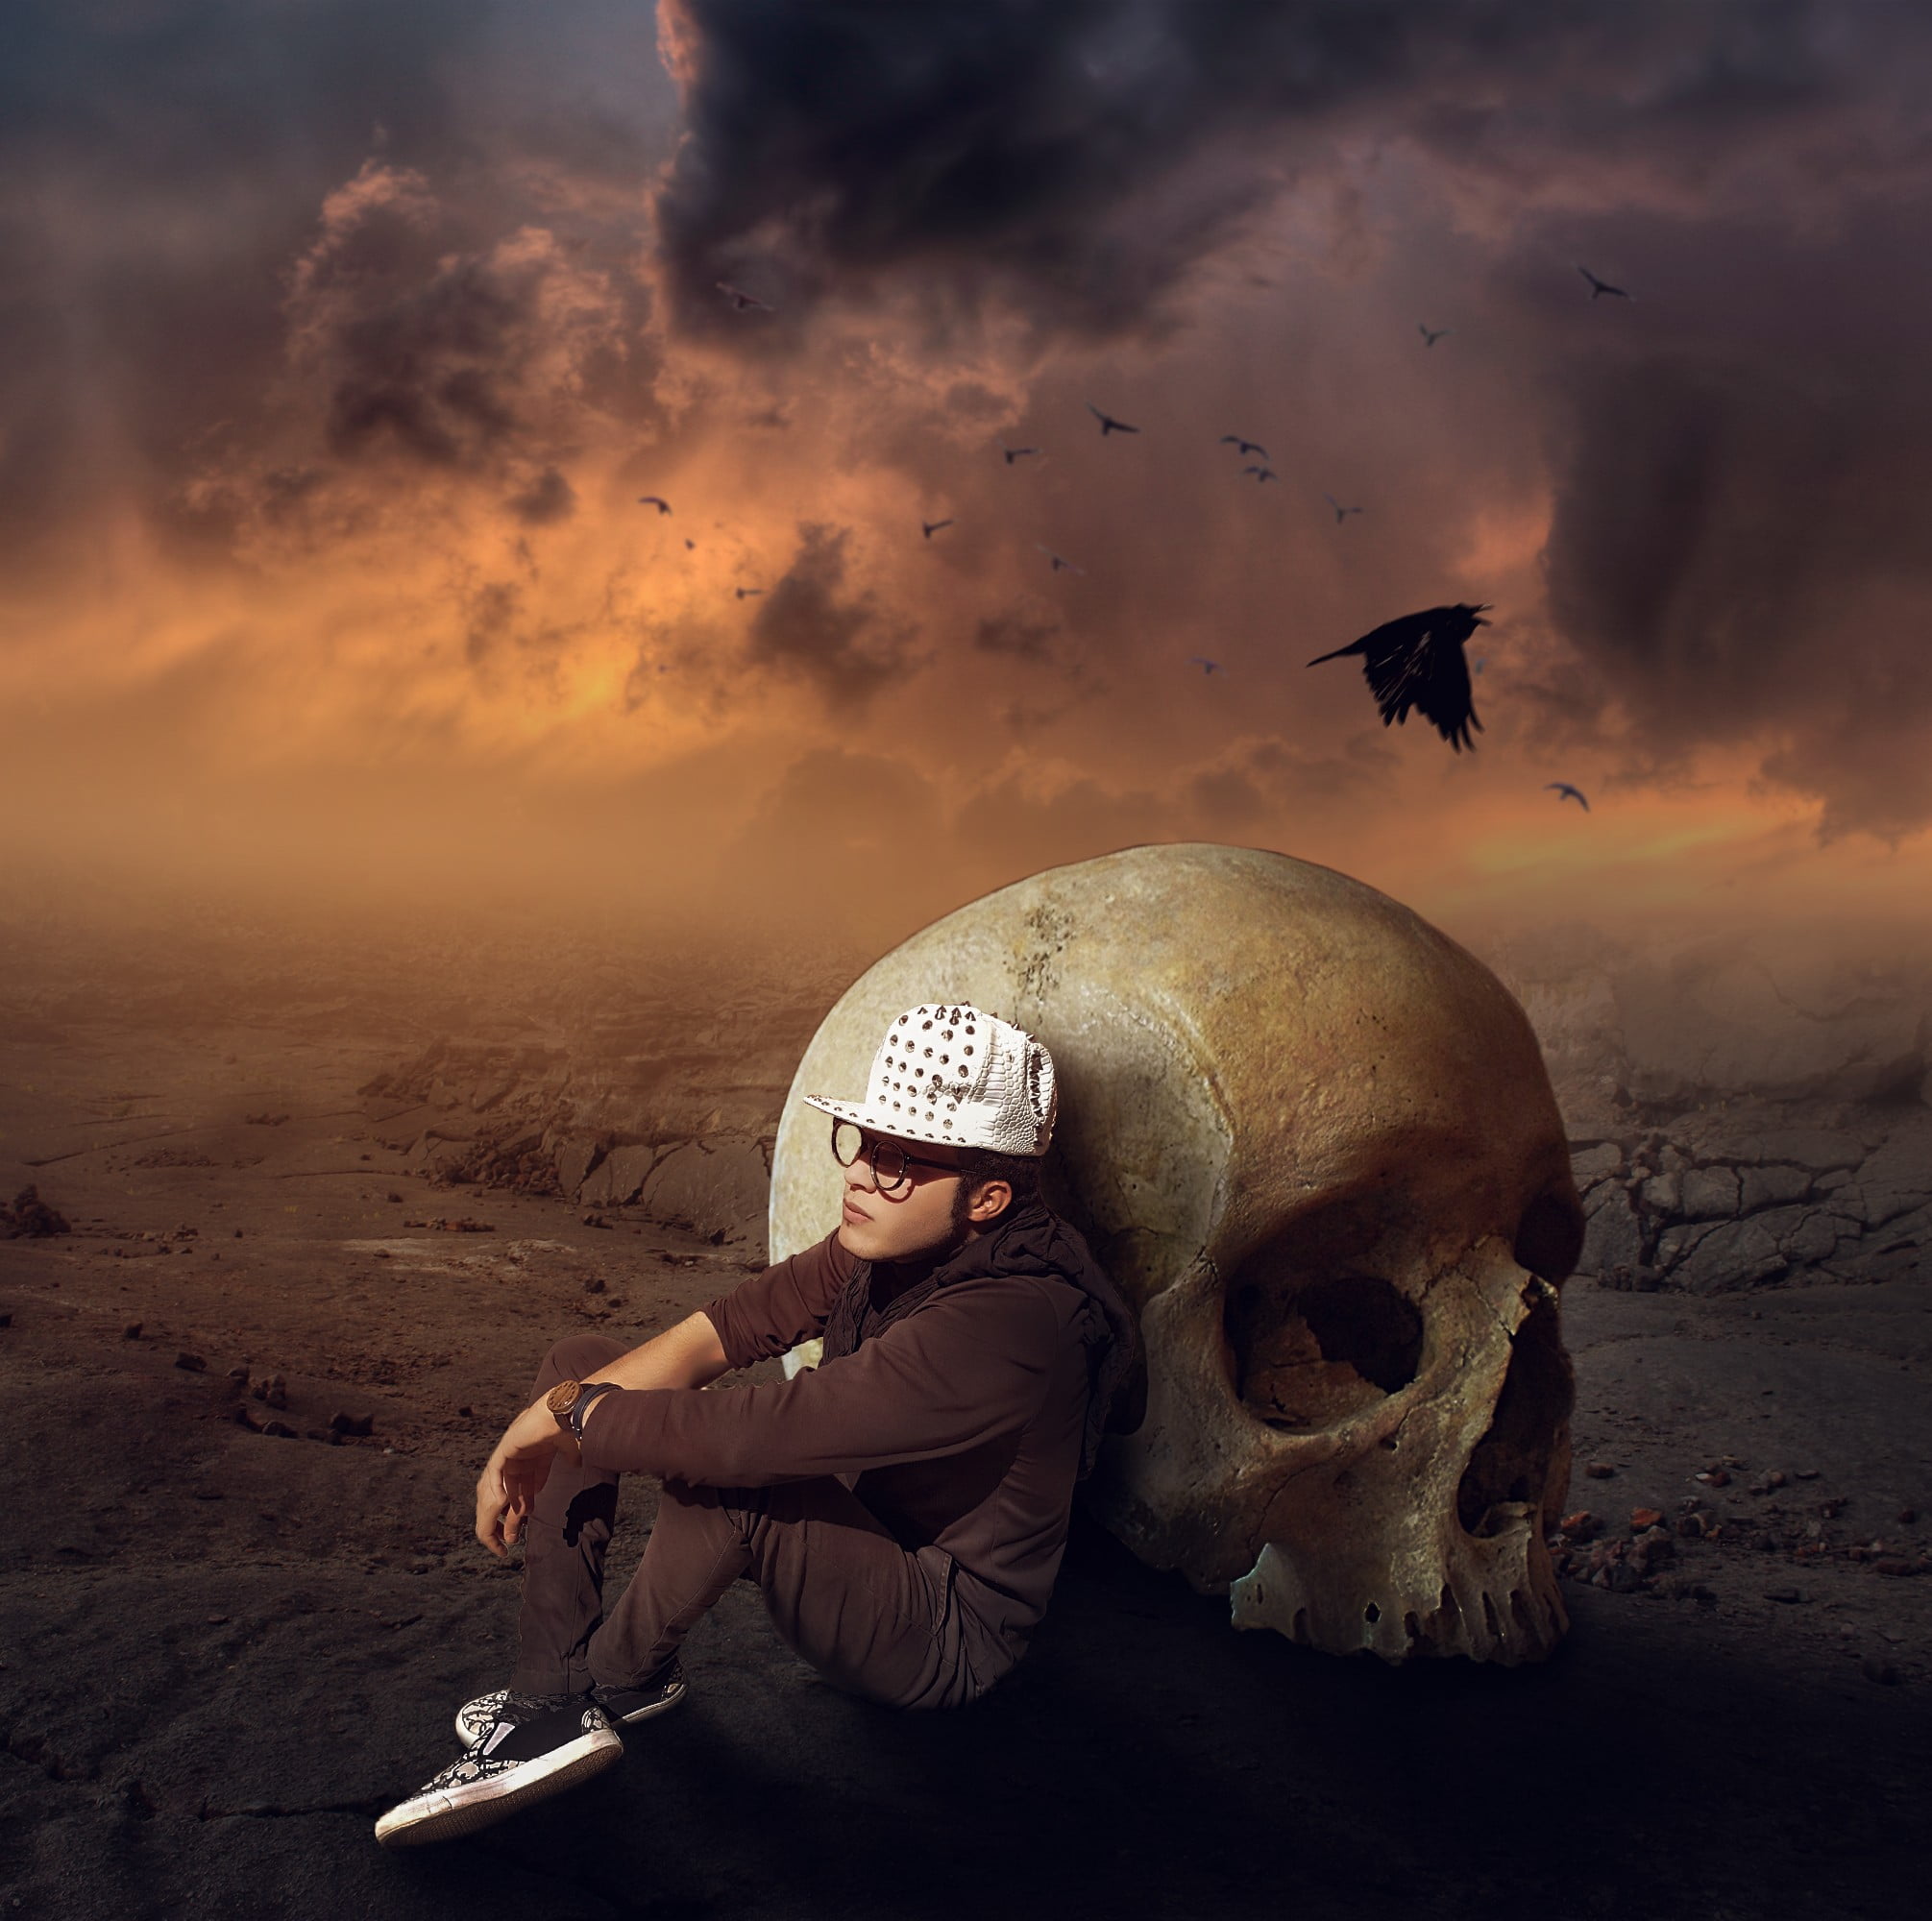 skull, Photoshop, one person, sky, nature, cloud - sky, full length